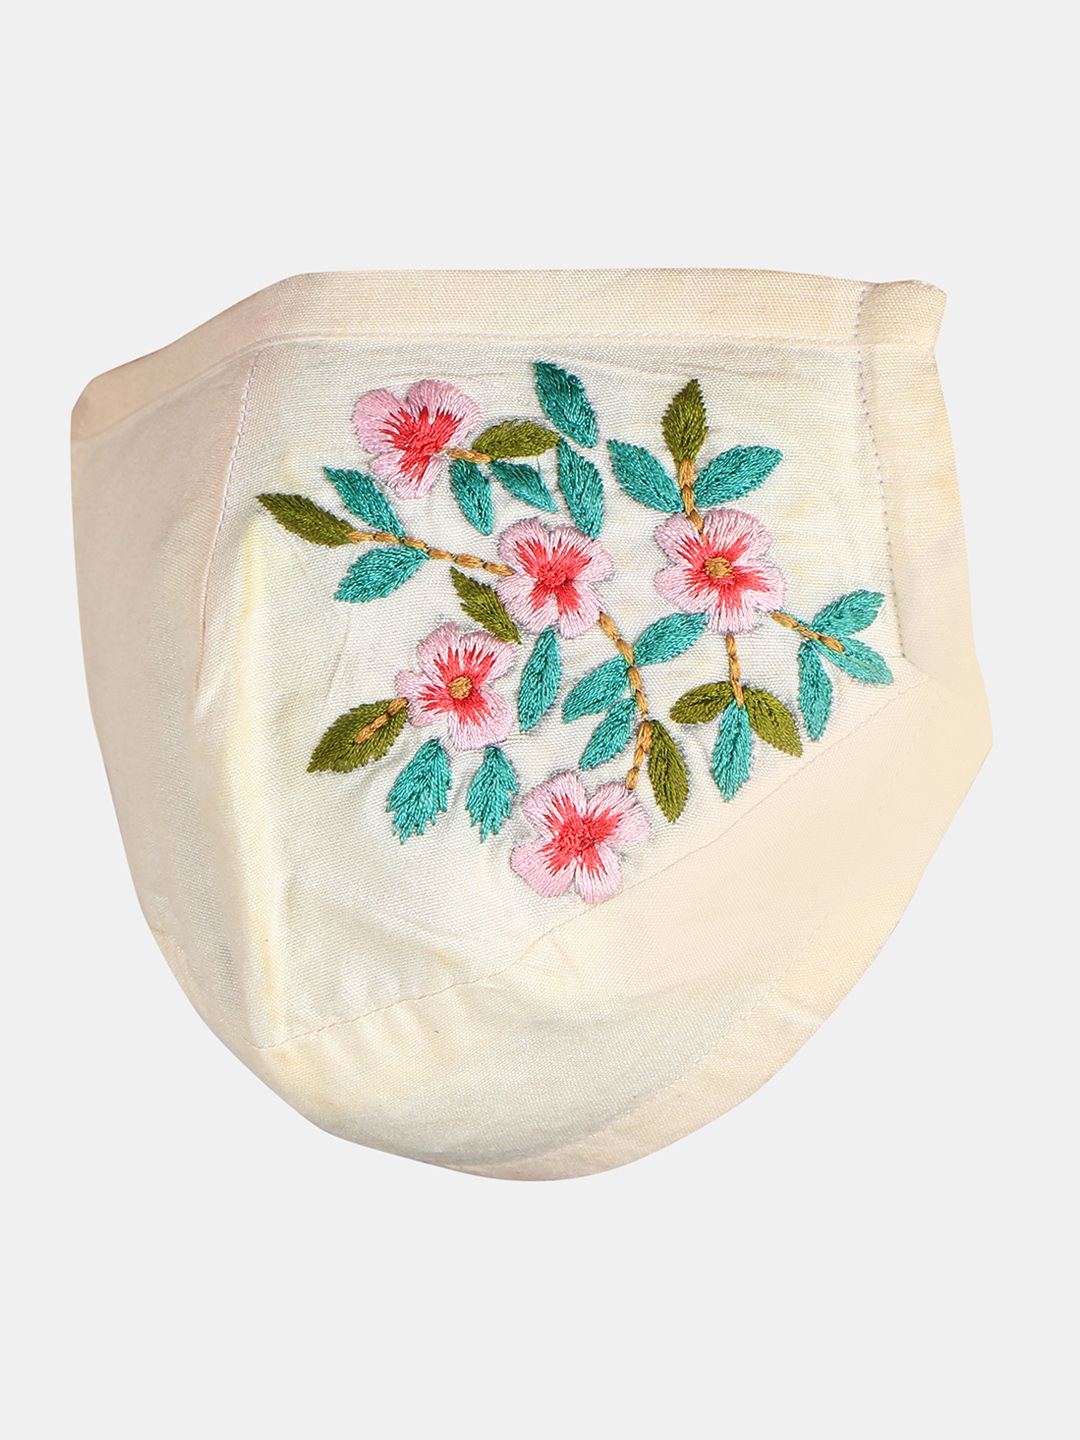 Chitwan Mohan Unisex Cream-Coloured Floral Embroidered 2-Ply Cloth Mask Price in India